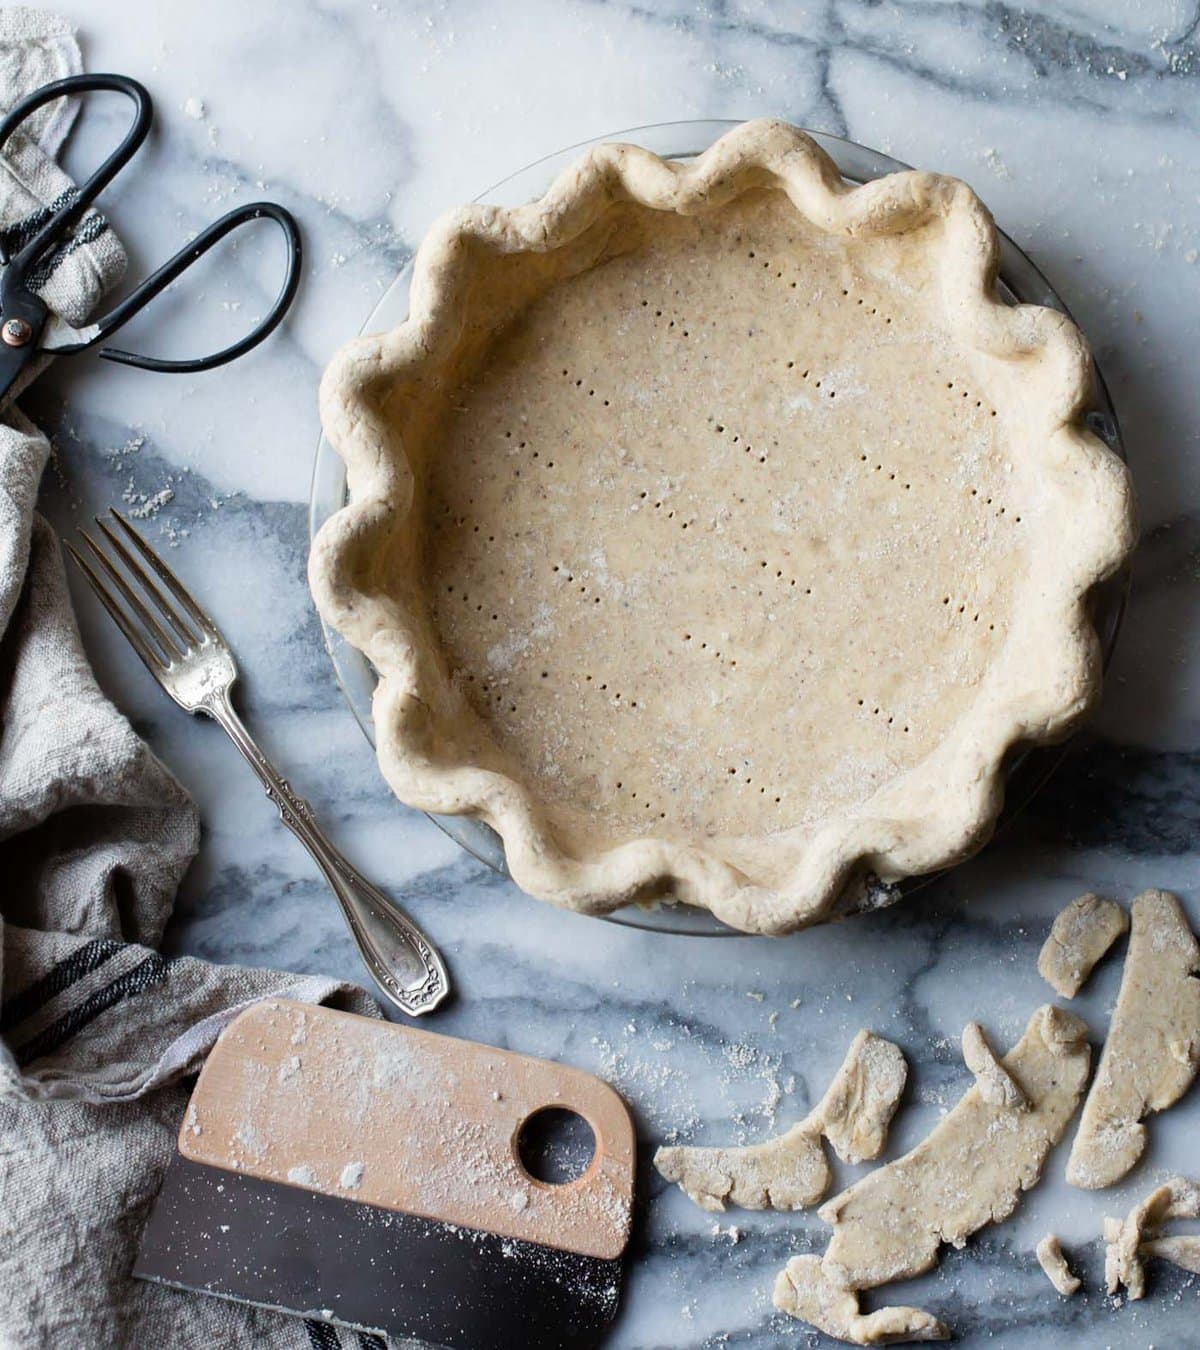 the finished unbaked pie crust, docked with a fork